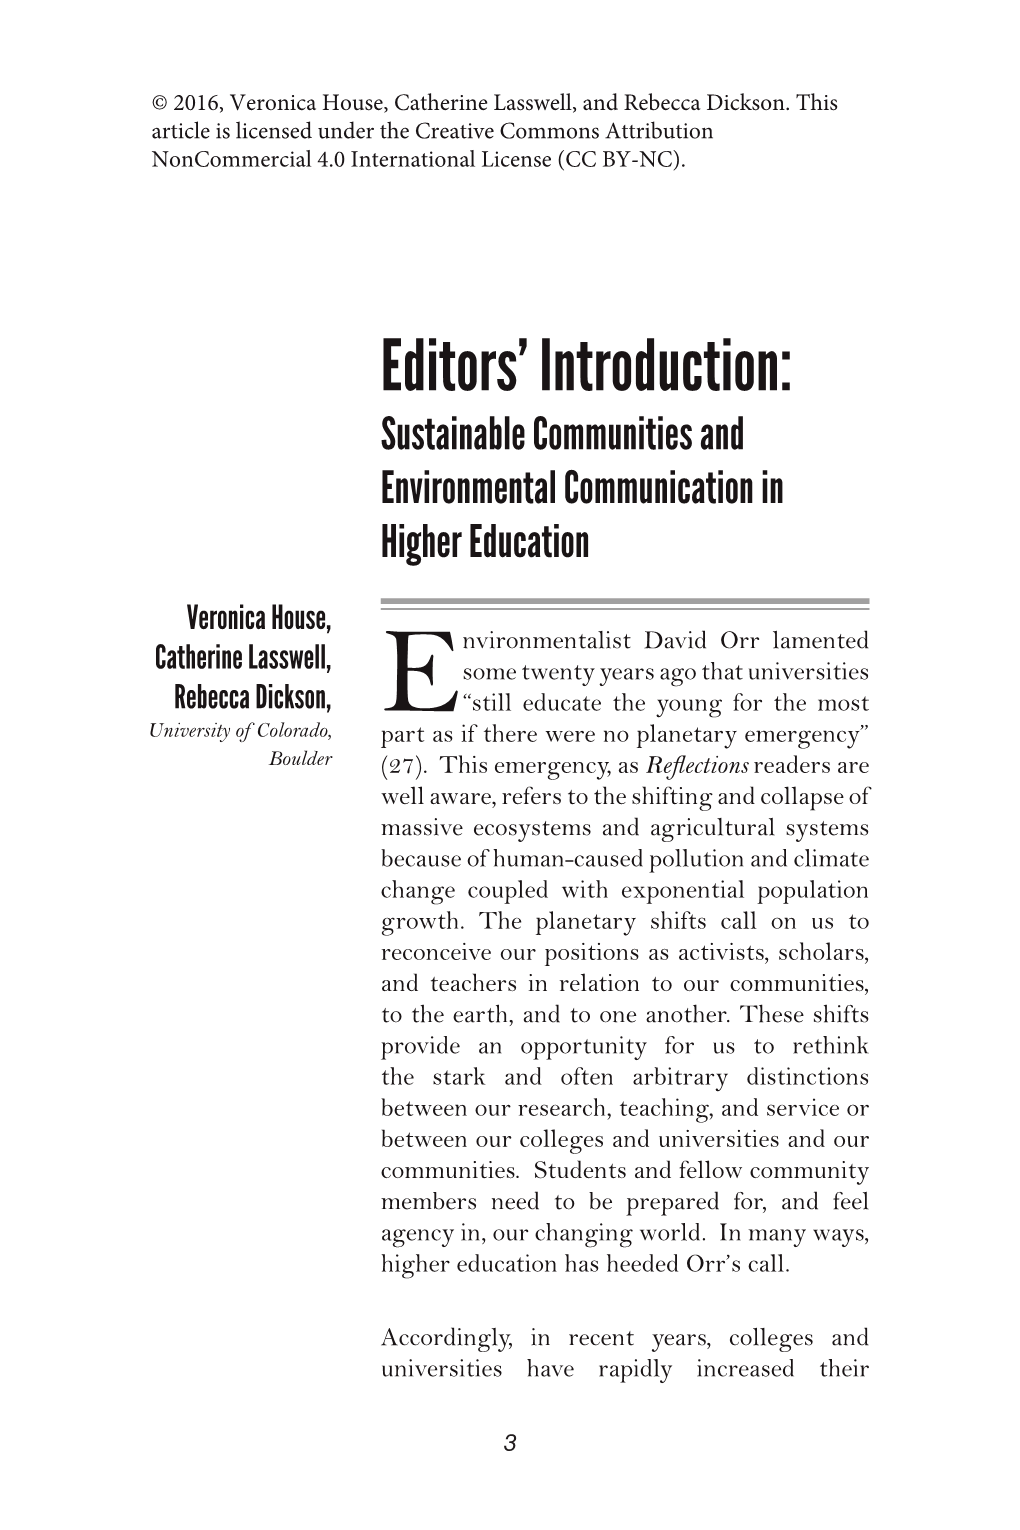 Special Editors' Introduction: Sustainable Communities And